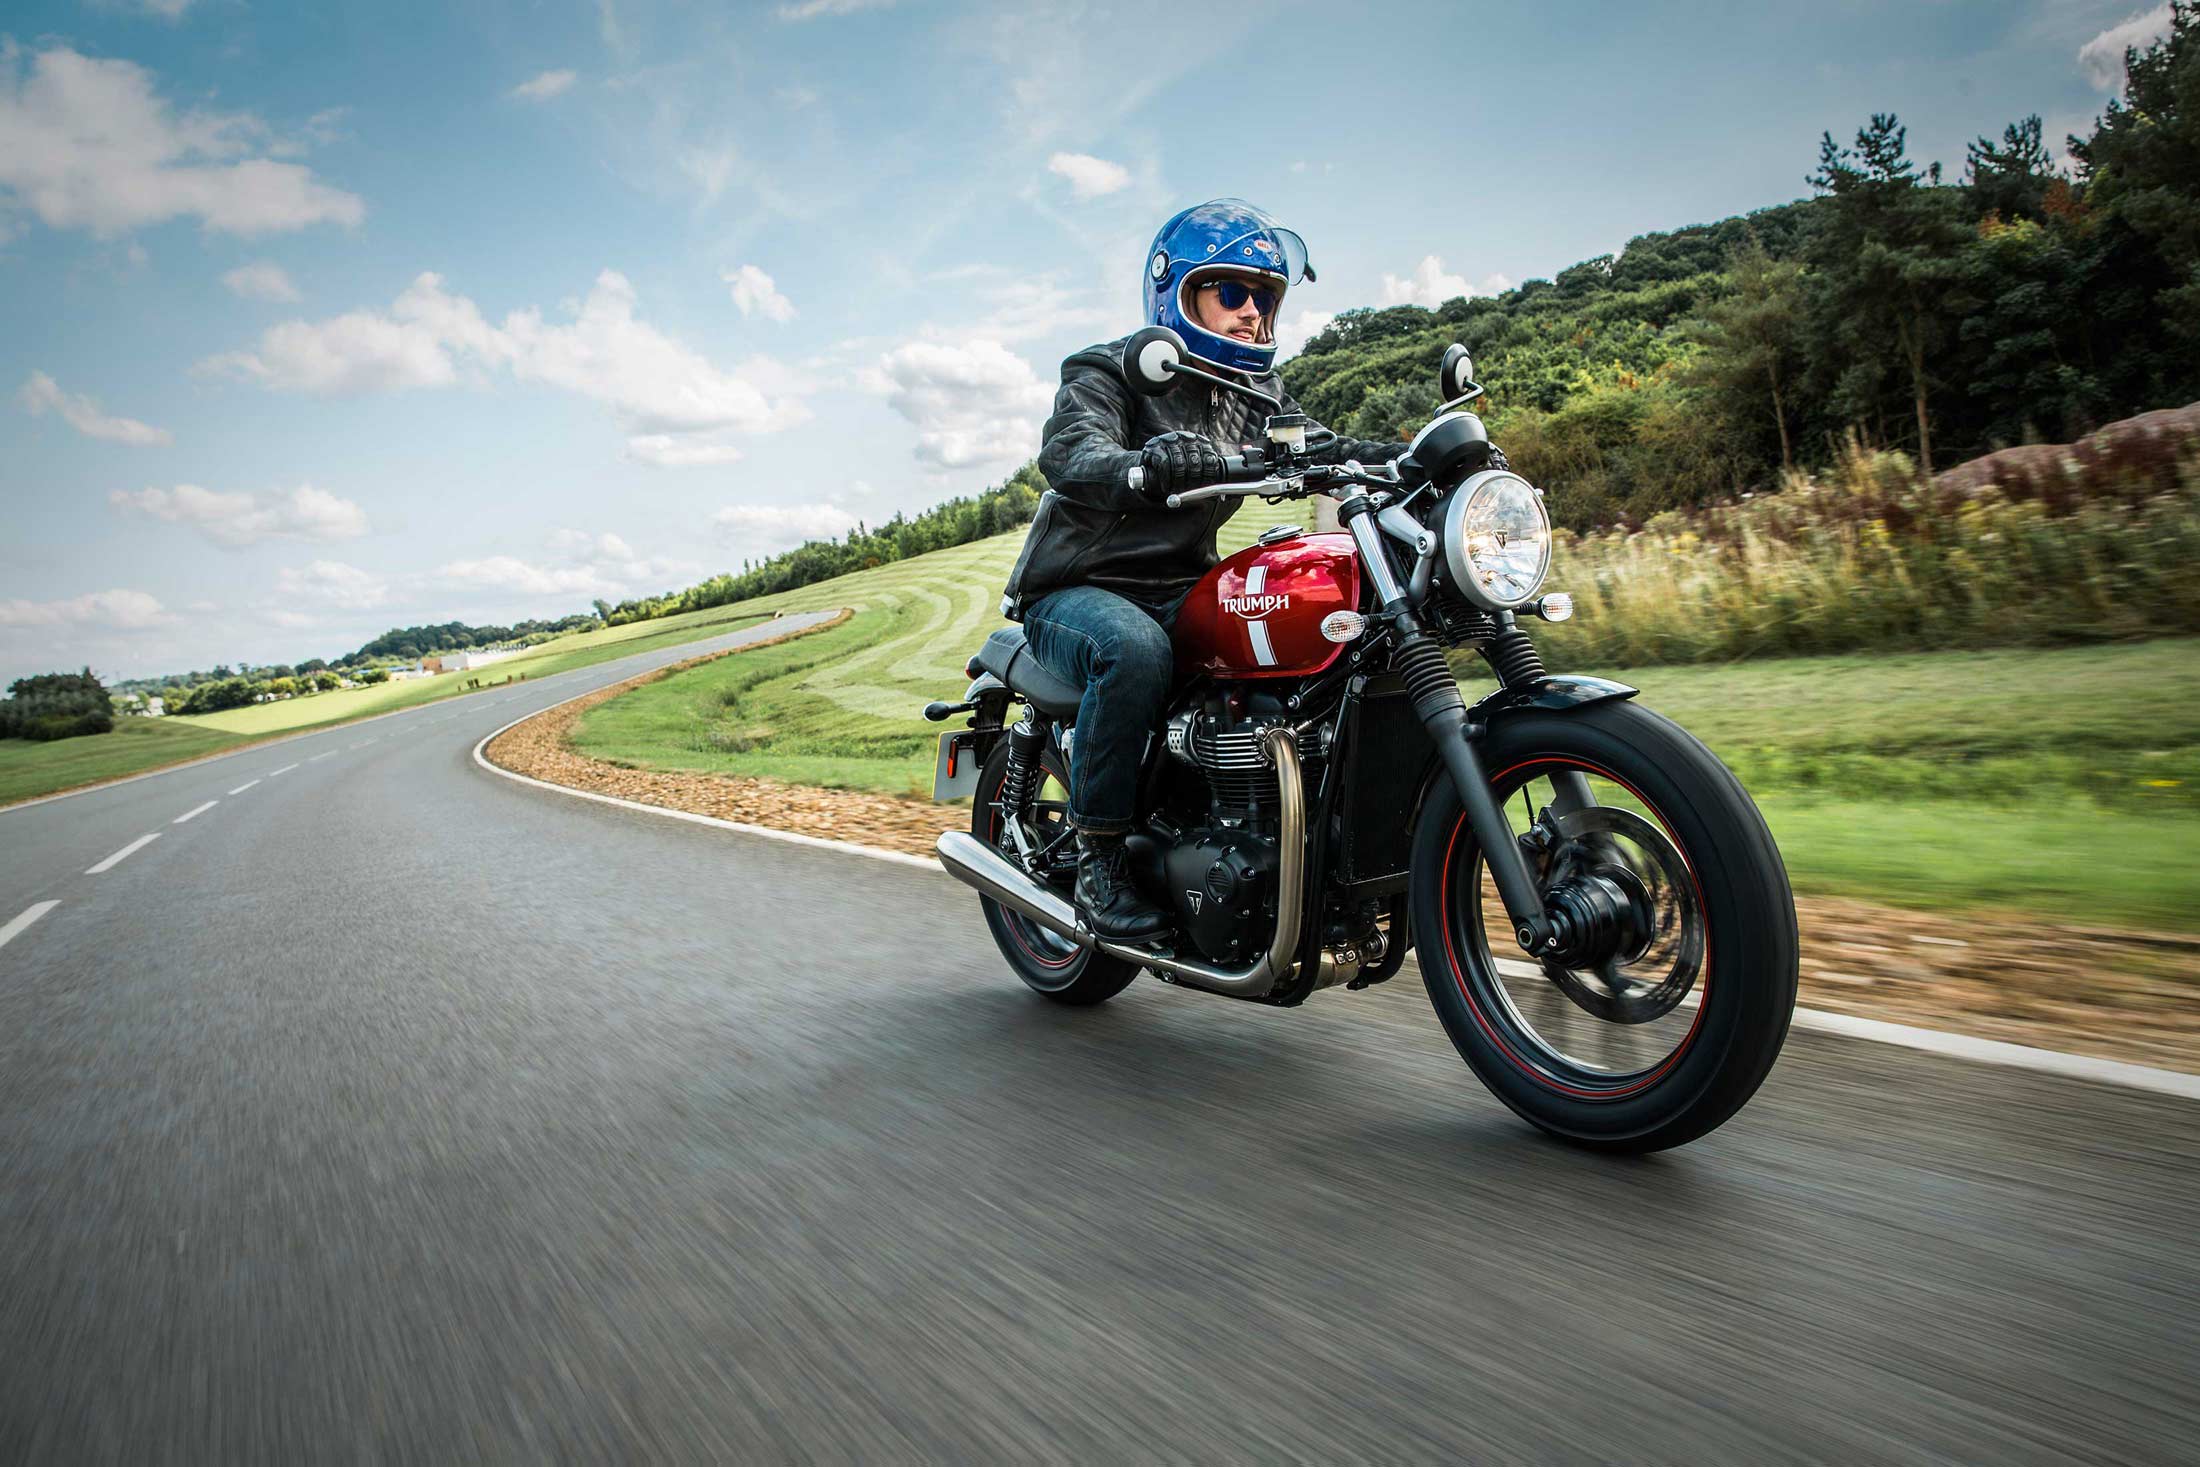 triumph-motorcycles-bonneville-street-twin-riding in british countryside